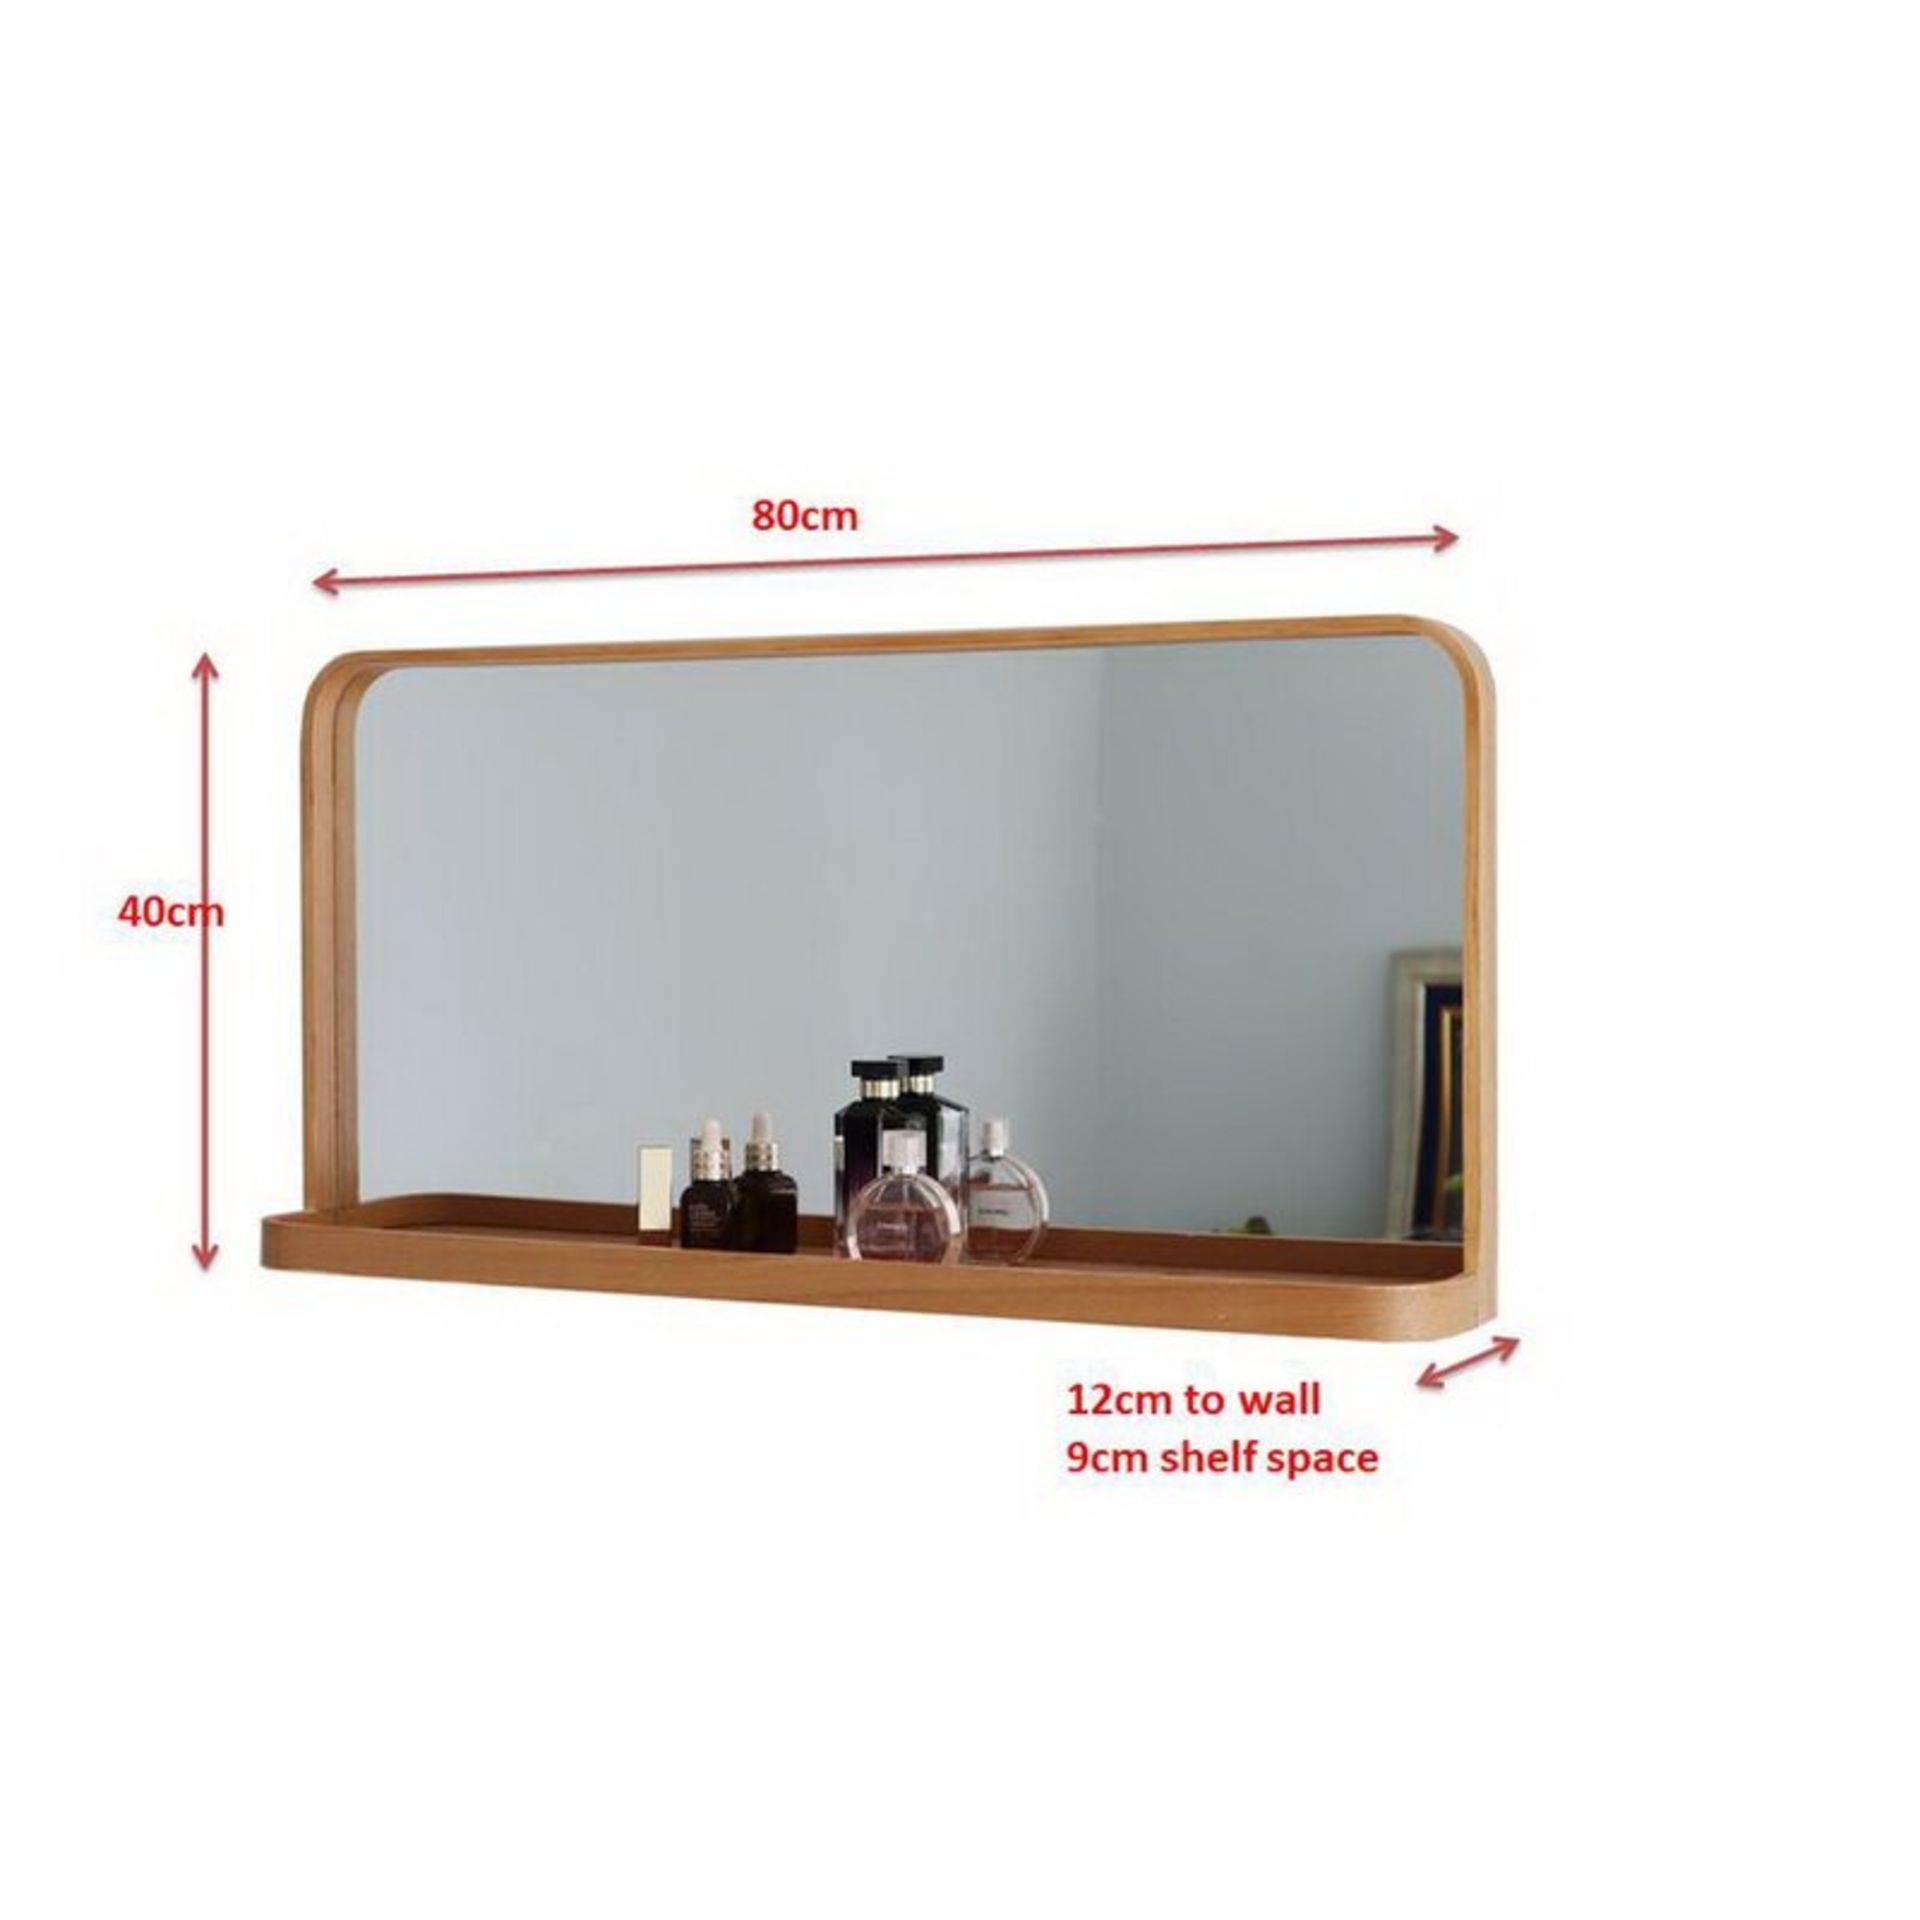 Bedale Accent Mirror - RRP £79.99. - Image 3 of 3